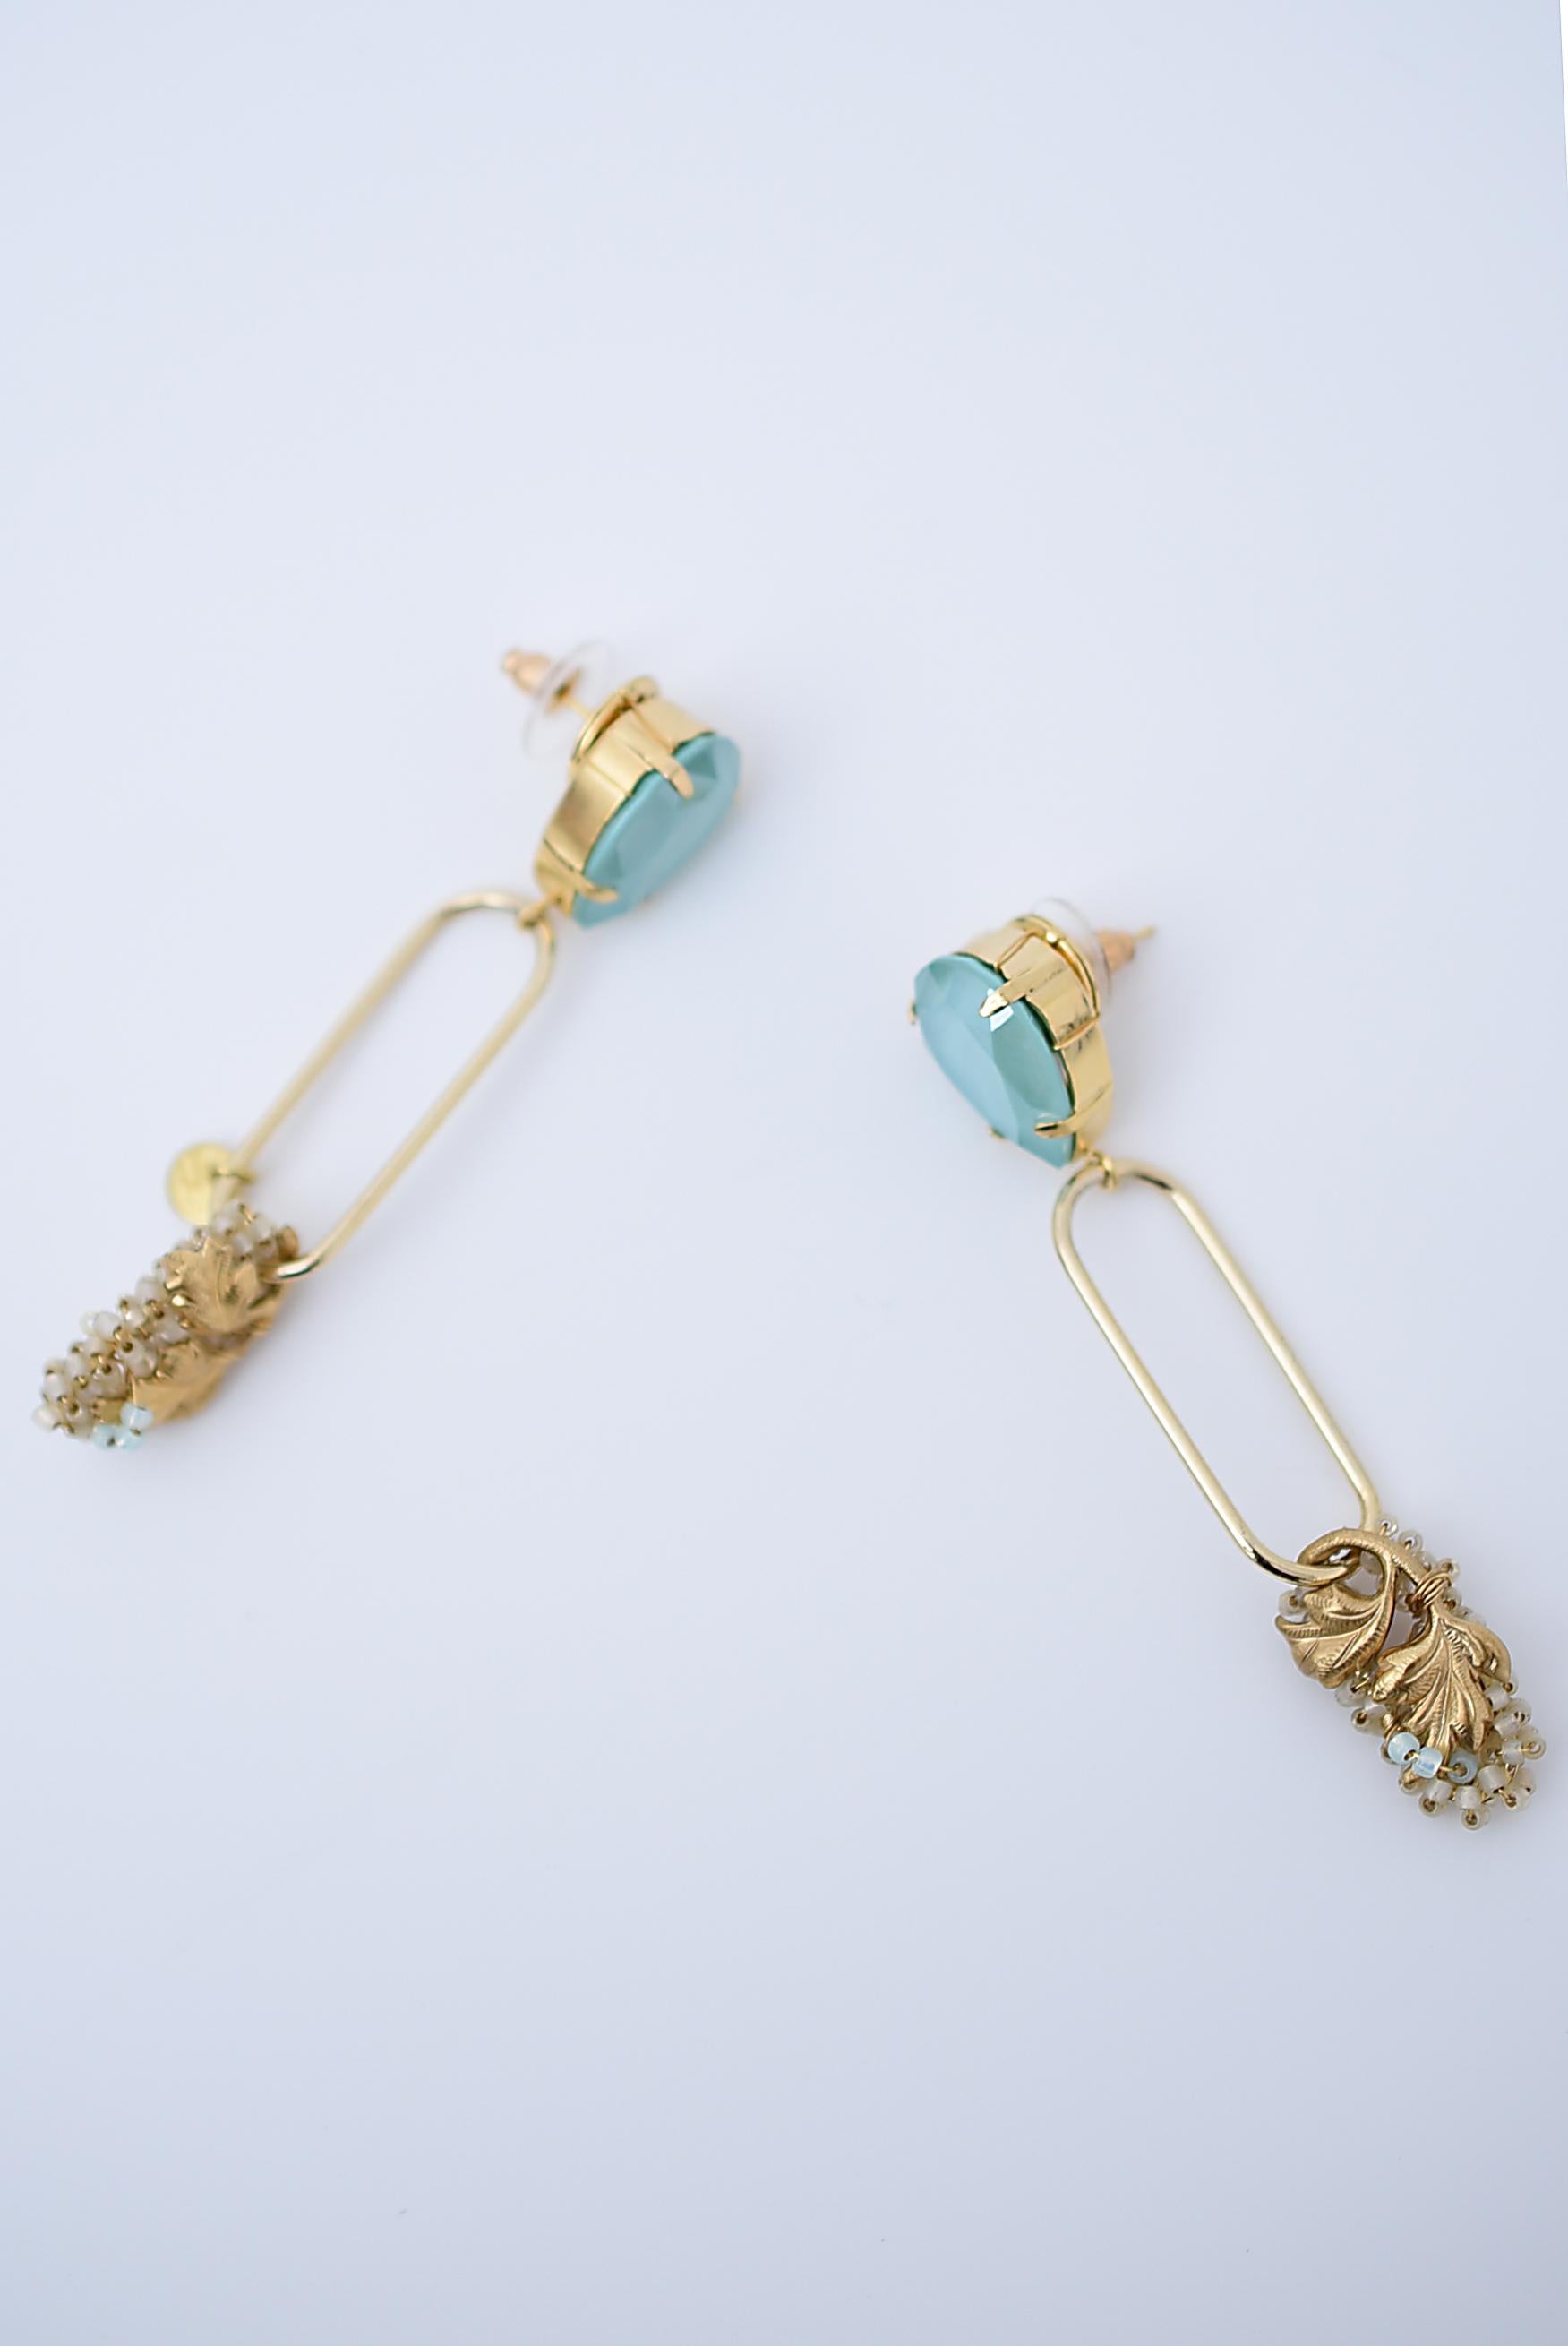 material:1970’s American vintage parts,glass beads,brass,swarovski,stainless
size:length 7cm

A fresh mint green Swarovski is snugly attached to the ear.
The oval part below the Swarovski makes a big swing.
It is long, but the line is delicate, so